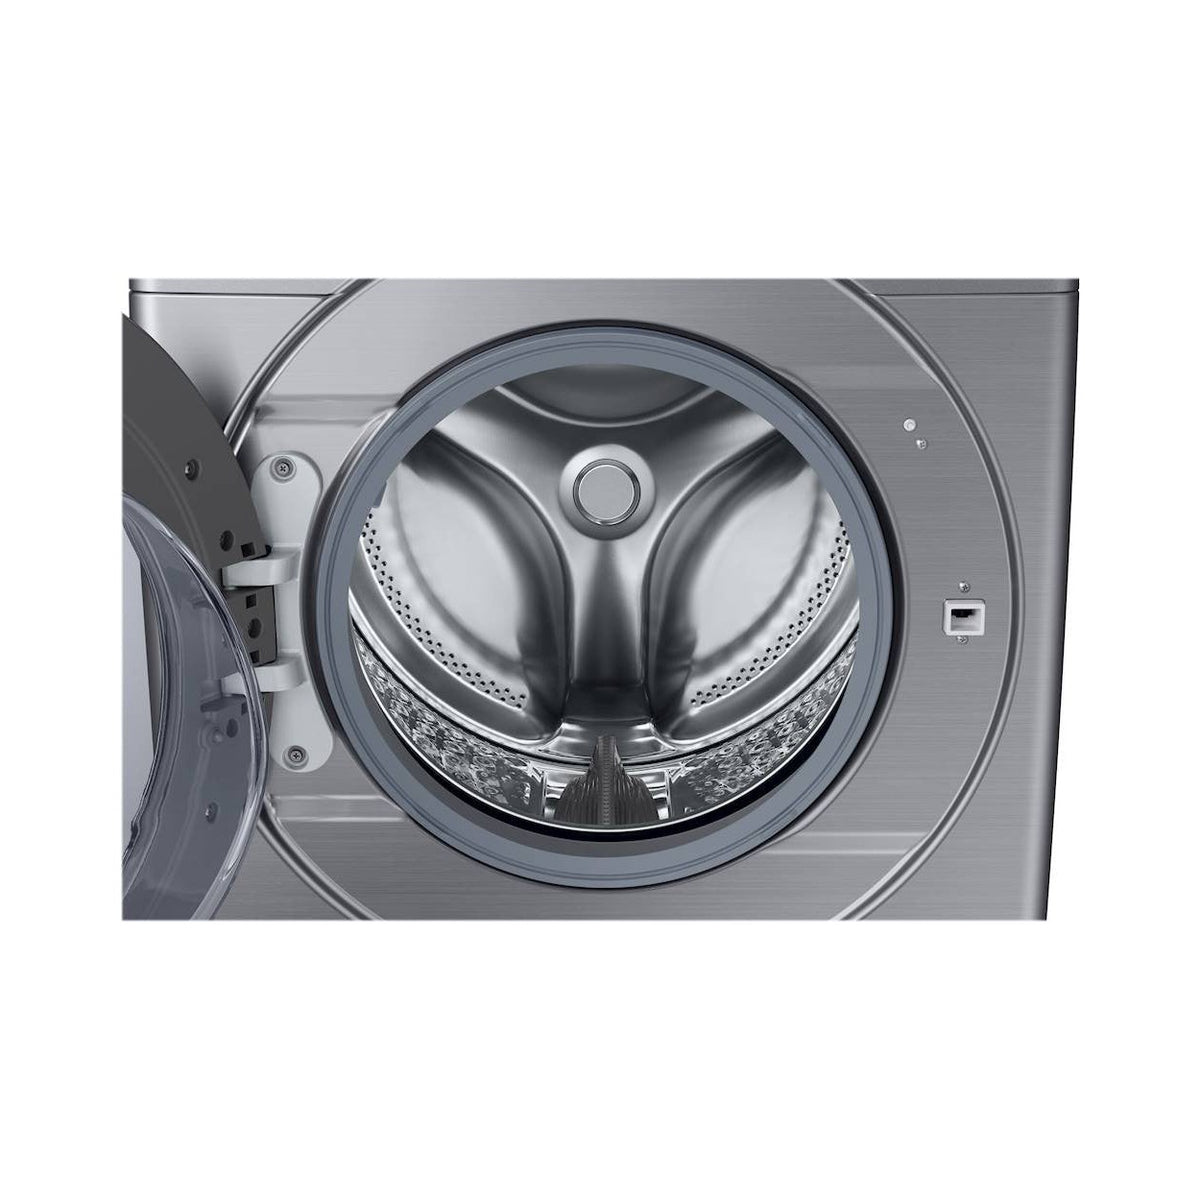 SAMSUNG WF45R6100AP/US 4.5 cu. ft. Front Load Washer with Steam in Platinum